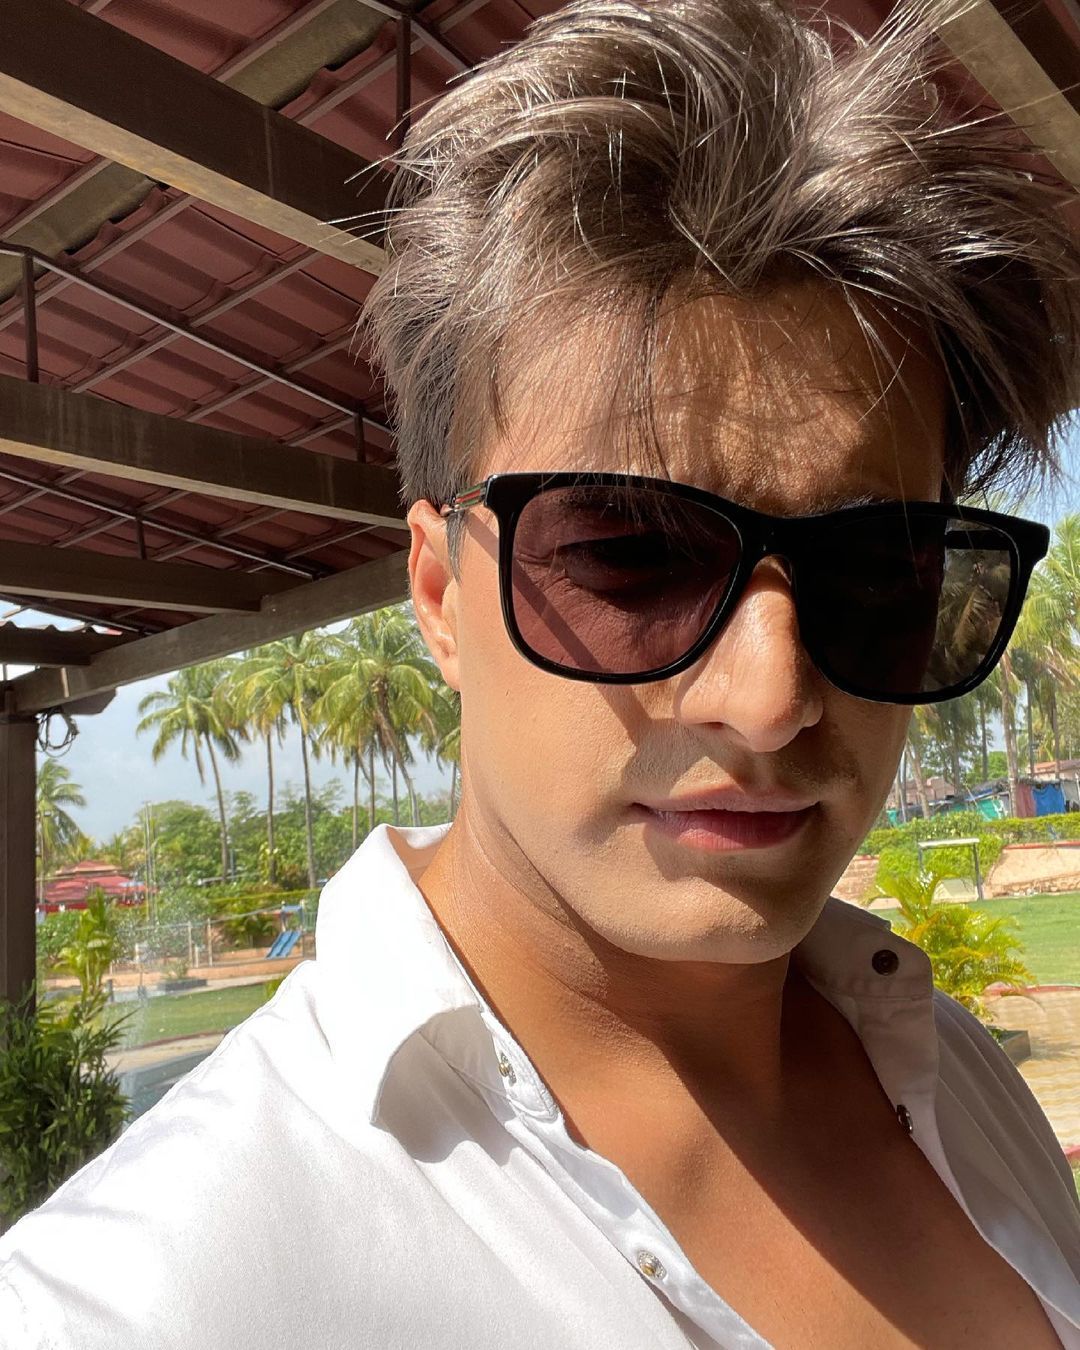 Mohsin Khan reacts to rumours of entering the Bigg Boss 15 house, says, "Yaar I am too shy for it"